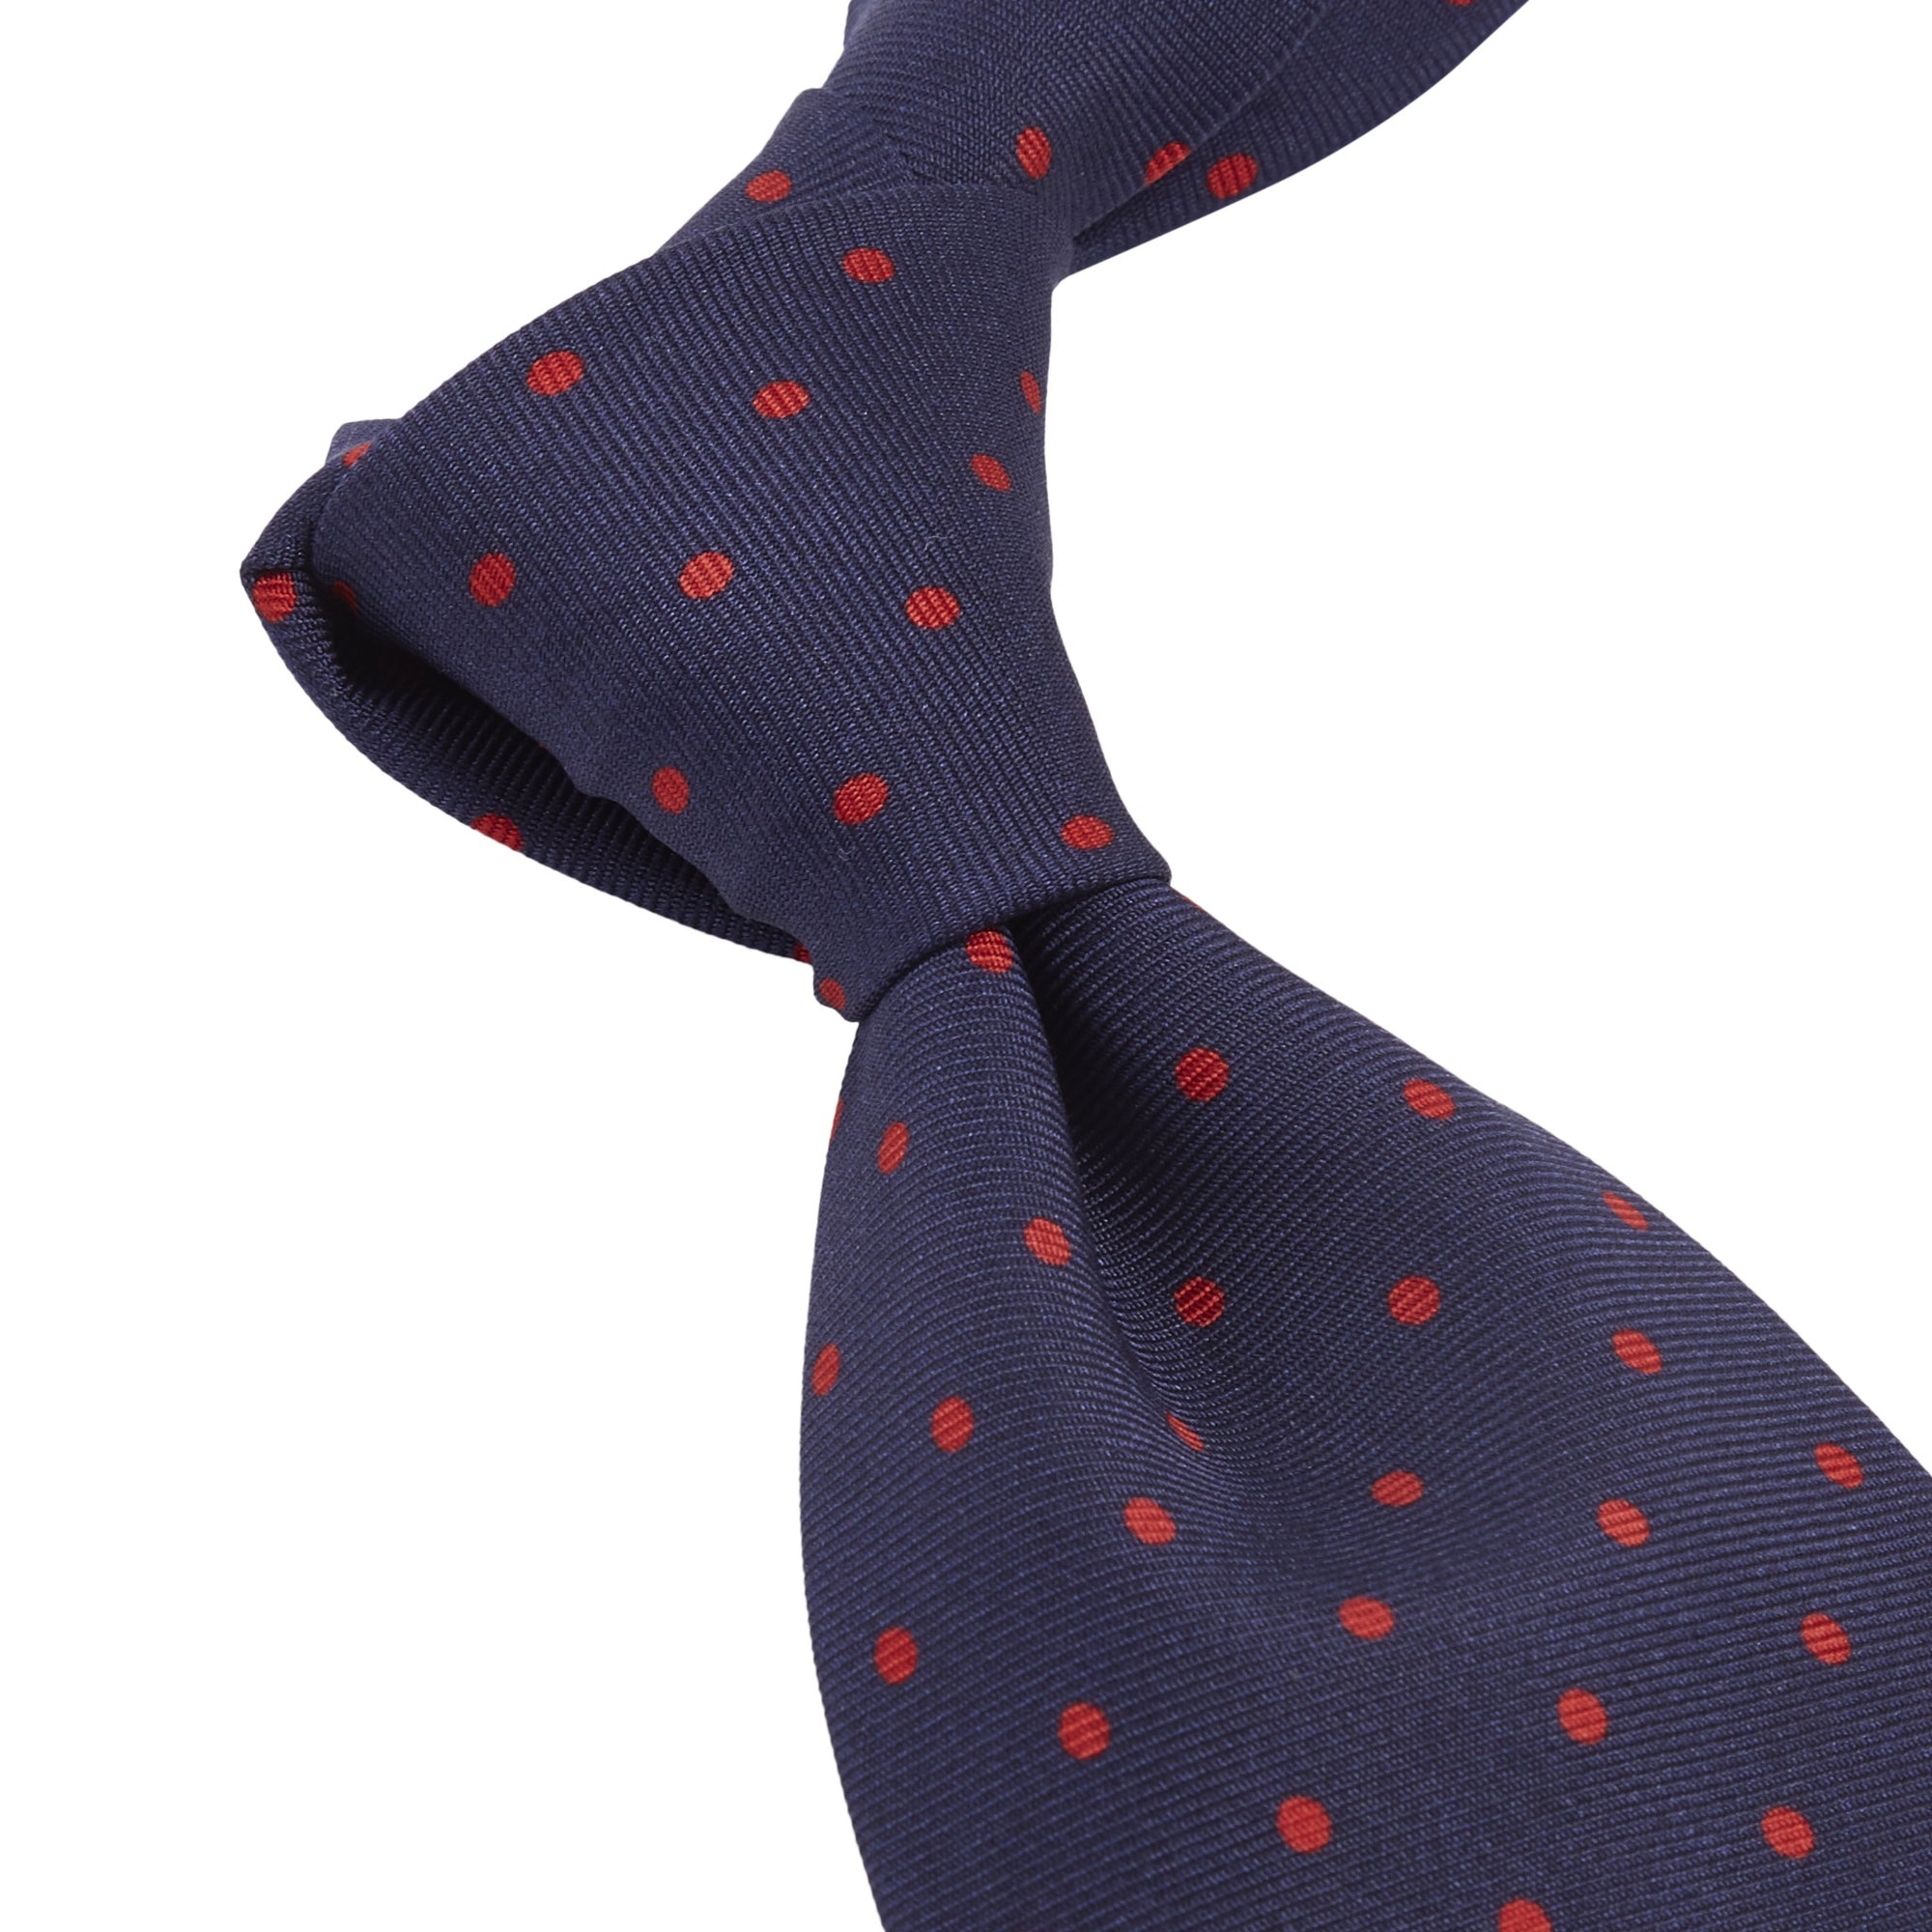 A Sovereign Grade Navy-Red London Dot Printed Silk Tie with red and blue polka dots from KirbyAllison.com.